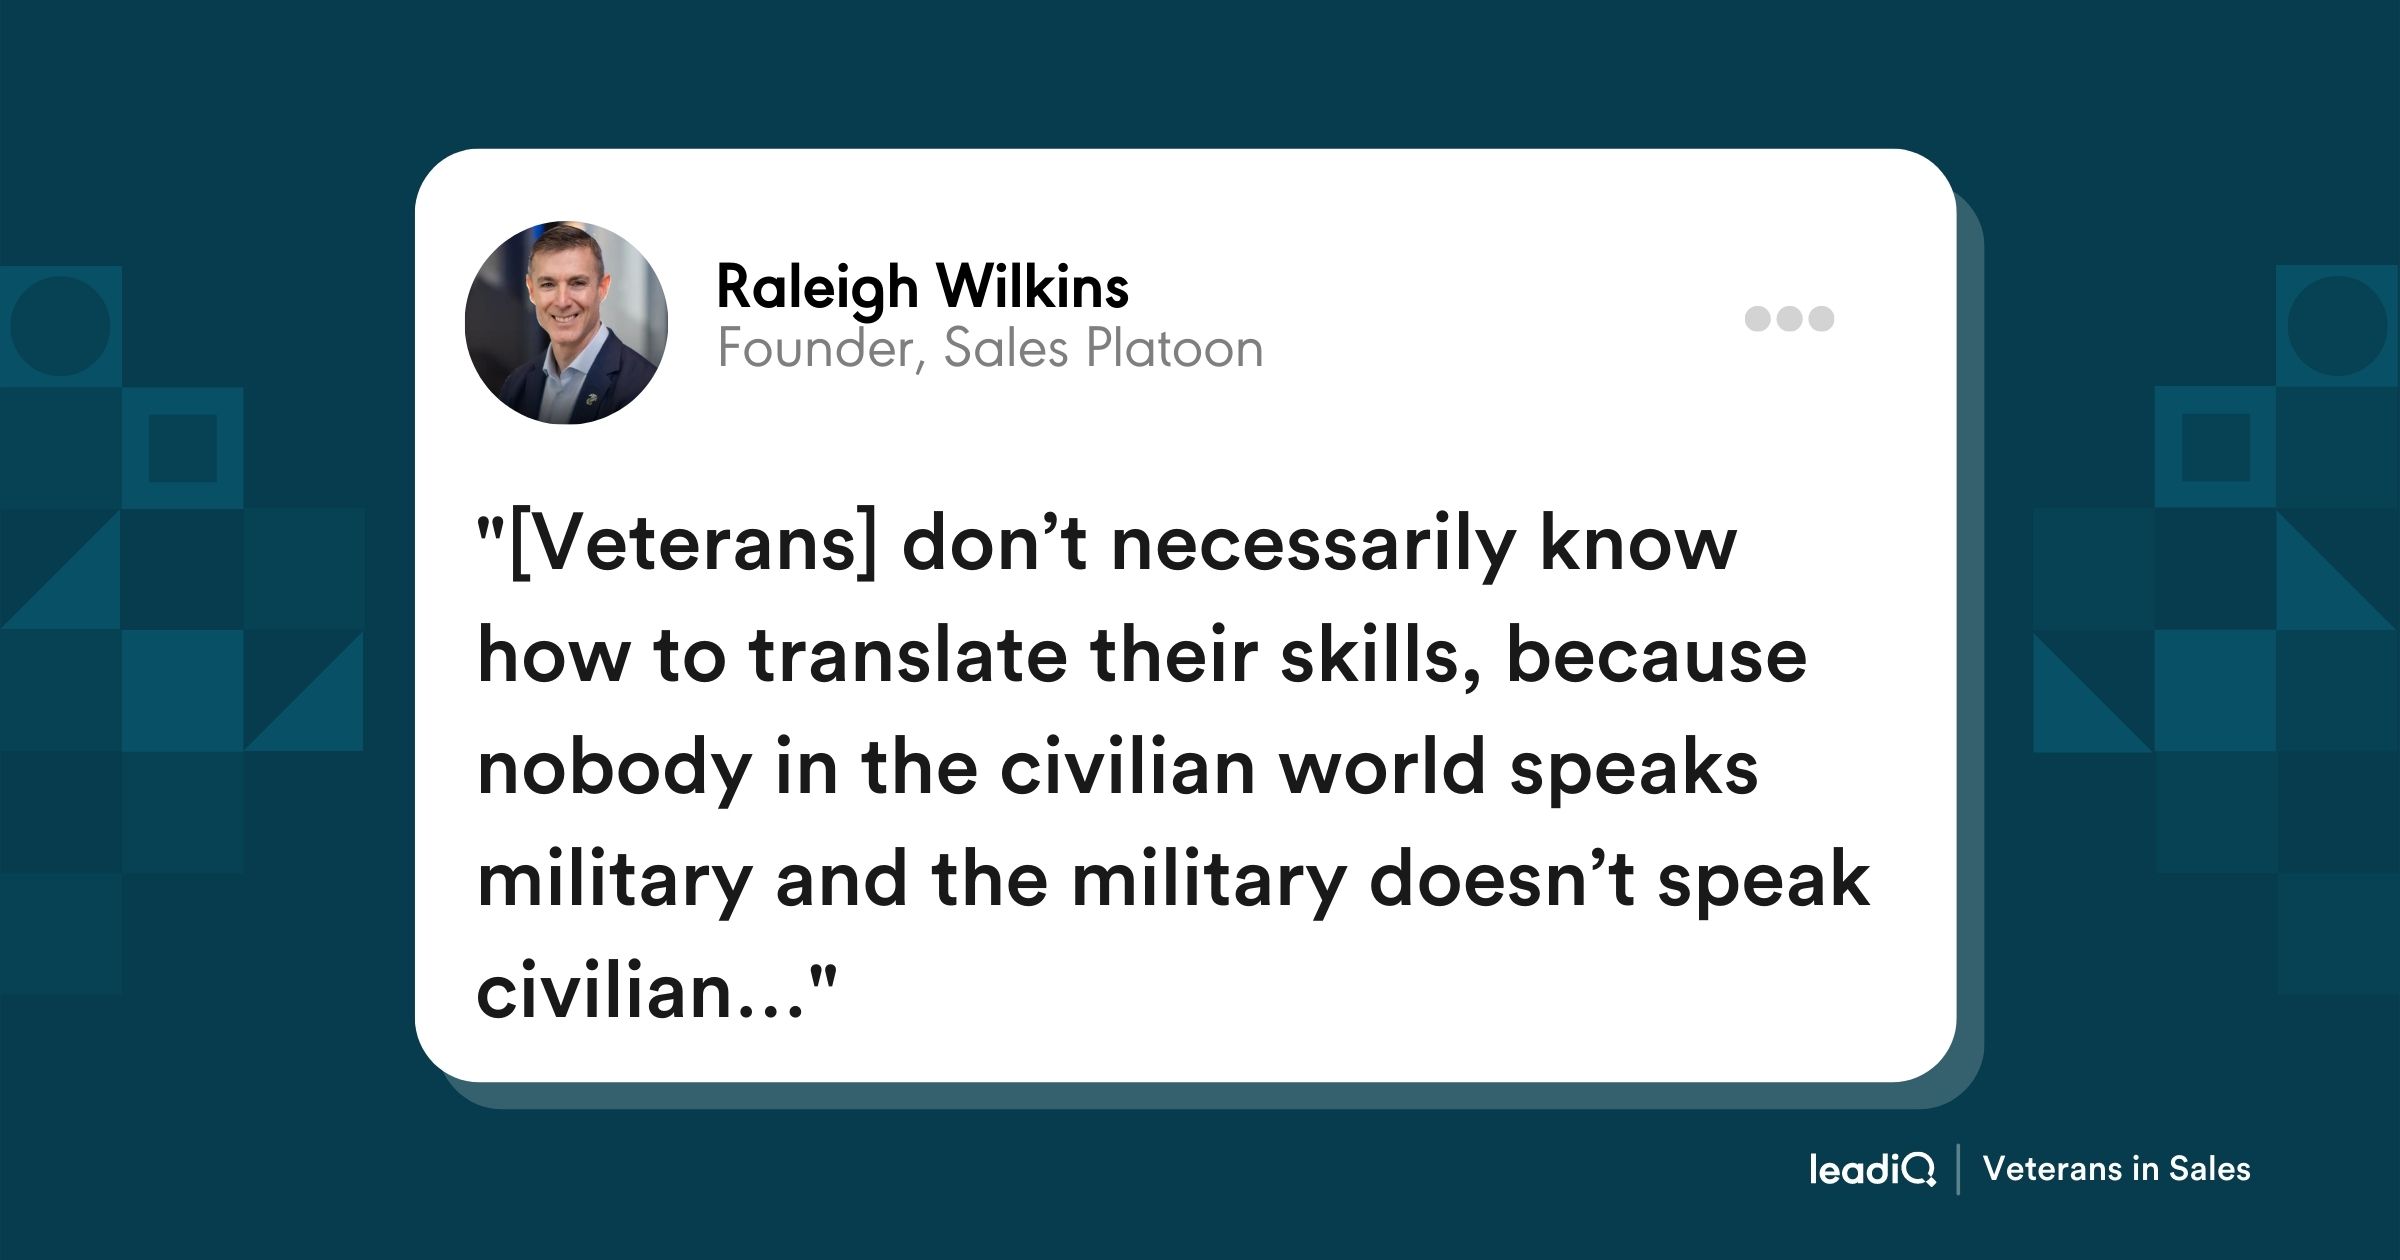 "[Veterans] don’t necessarily know how to translate their skills, because nobody in the civilian world speaks military and the military doesn’t speak civilian…"